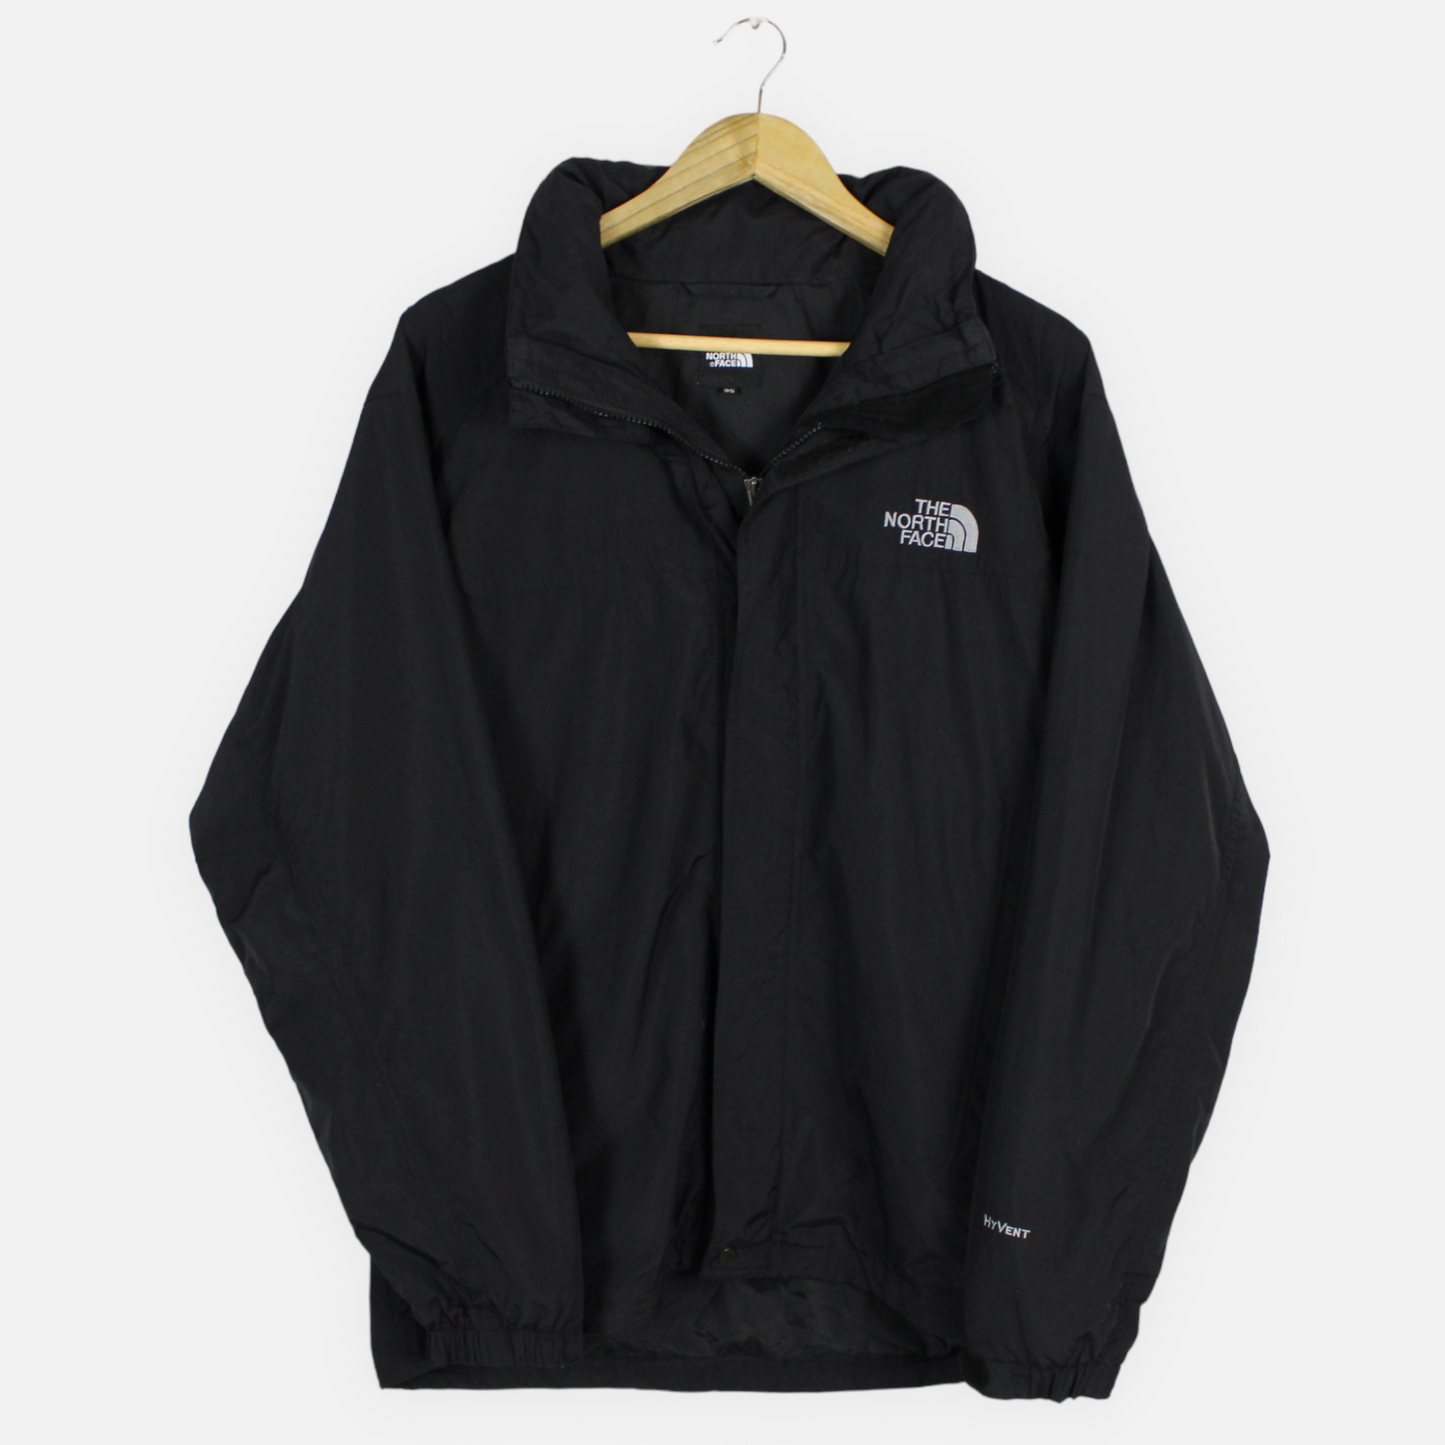 Vintage The North Face HyVent Jacket - M